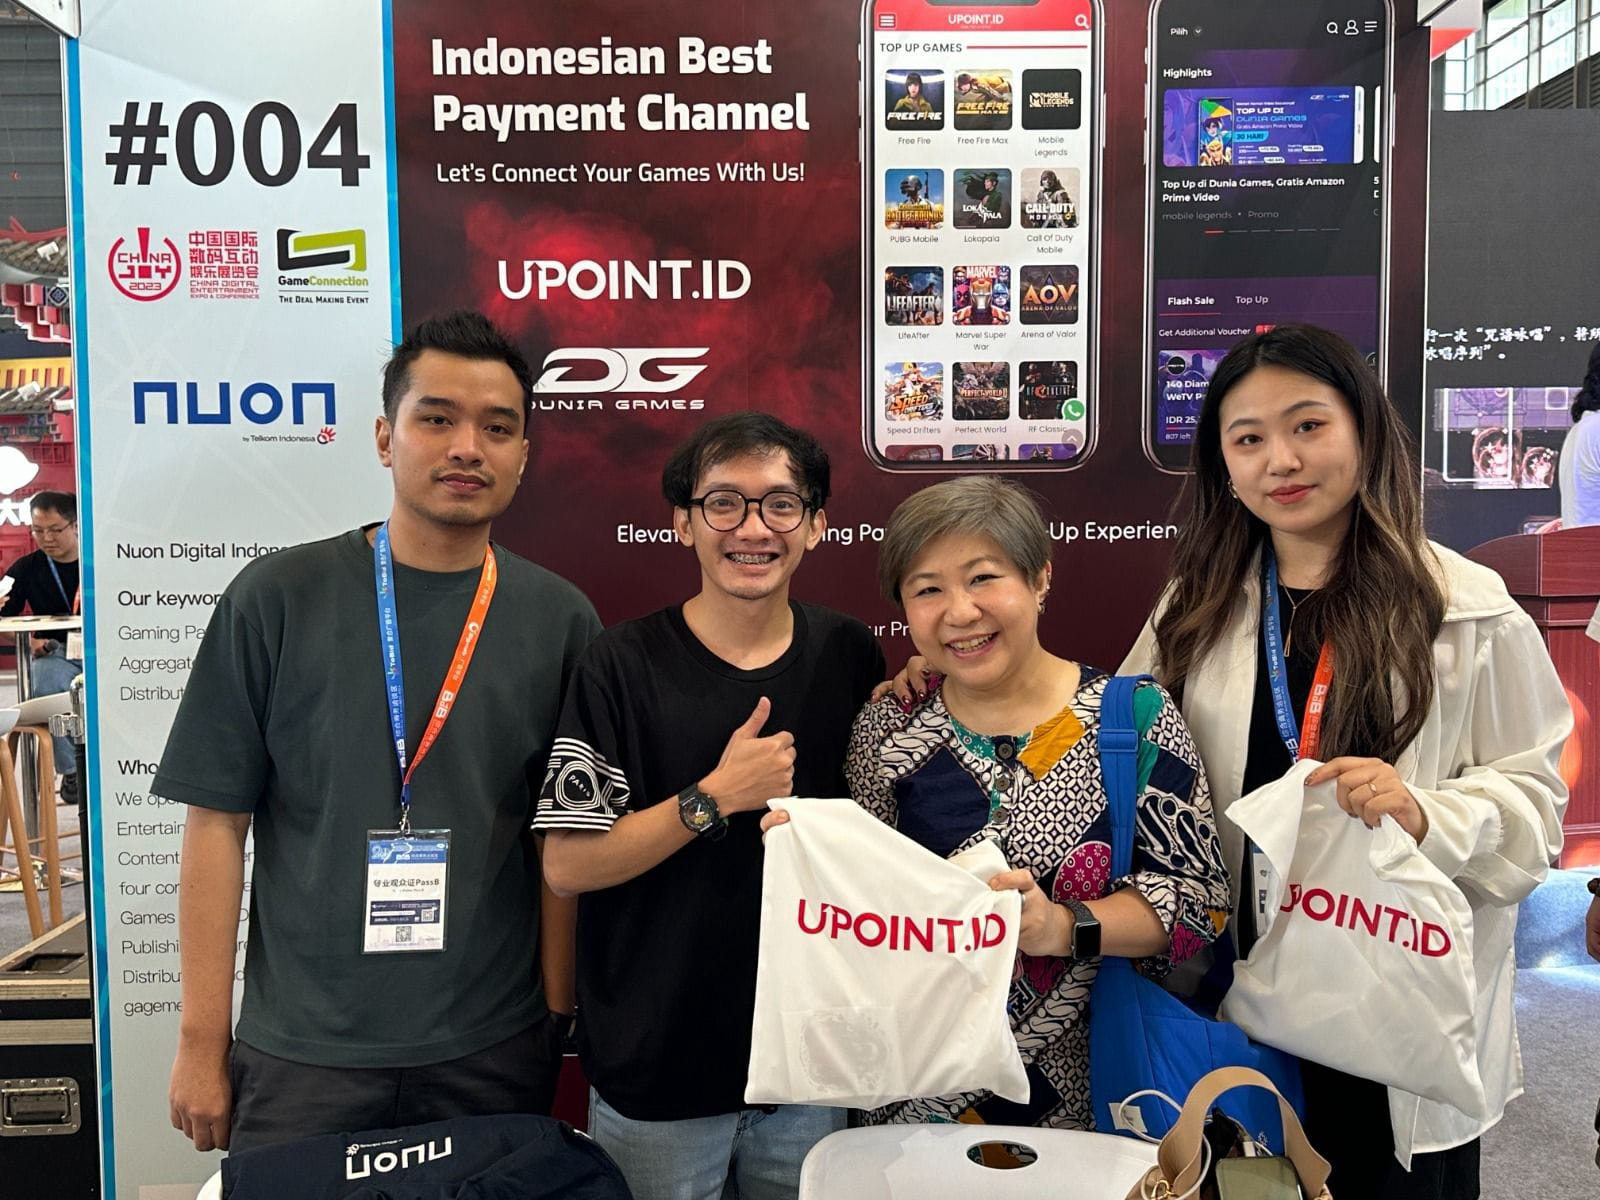 upoint.id